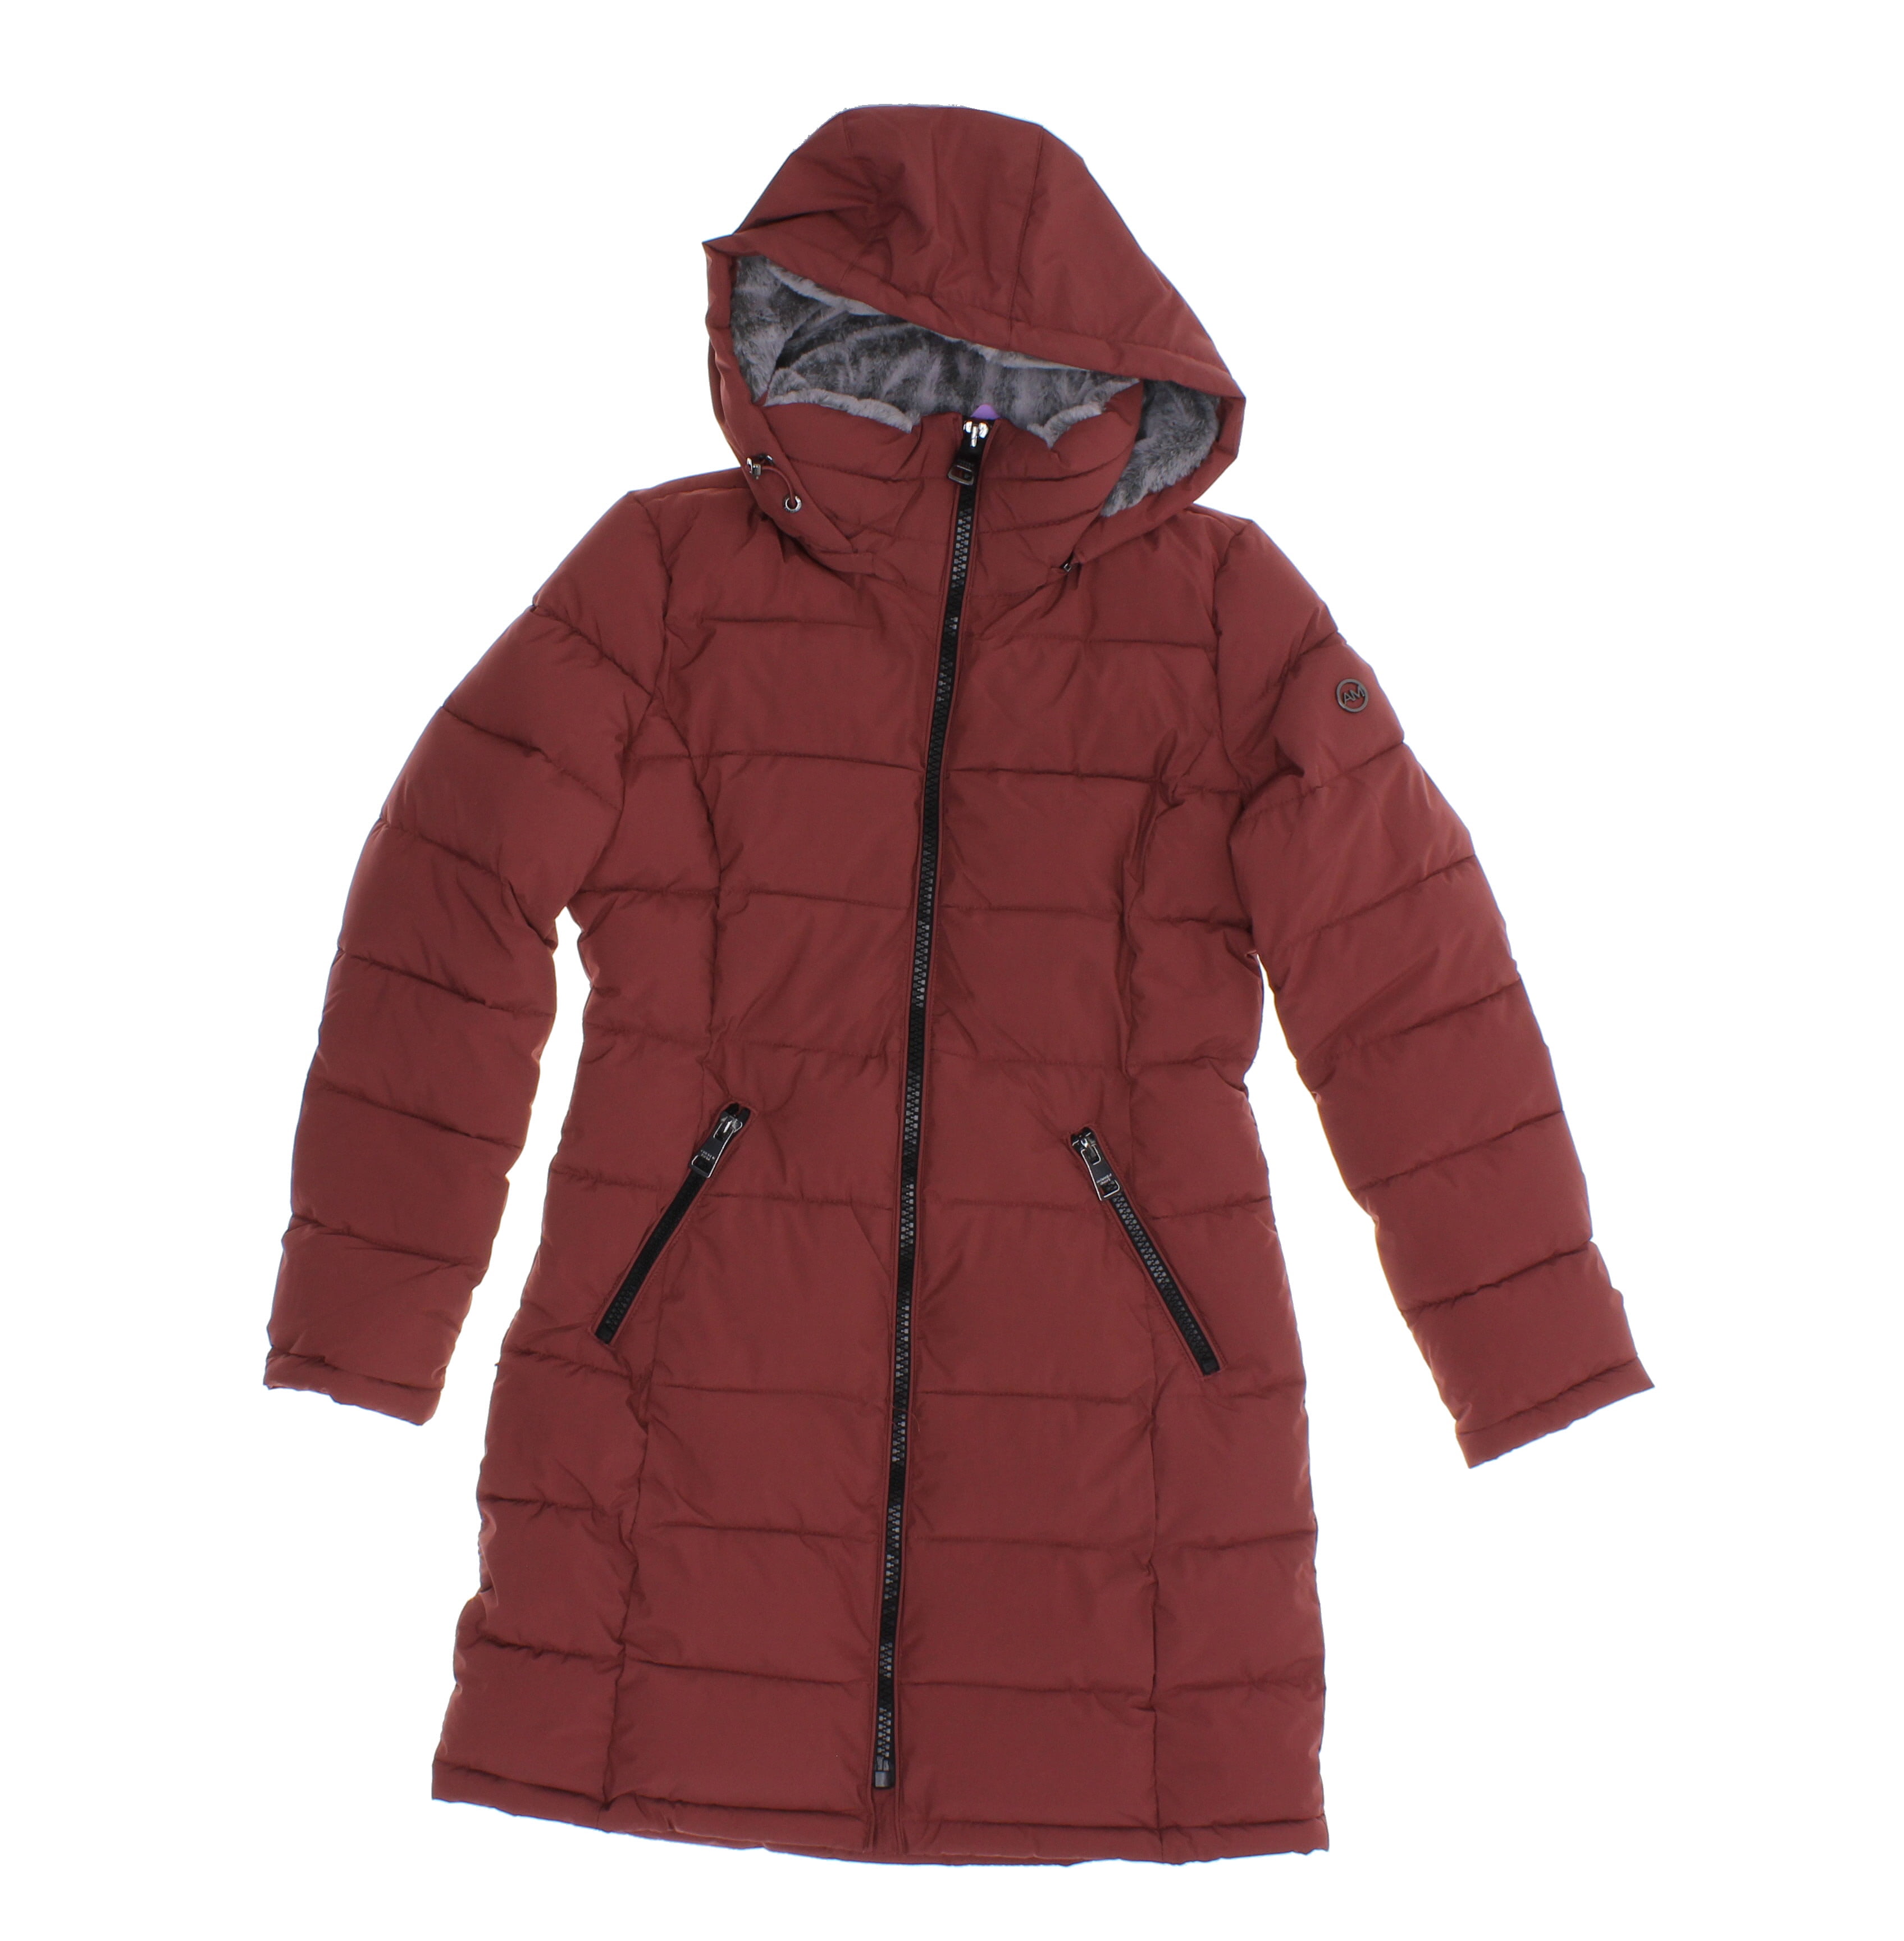 Andrew Marc Women's Hooded Long Stretch Parka - Terra Rose - Size XS